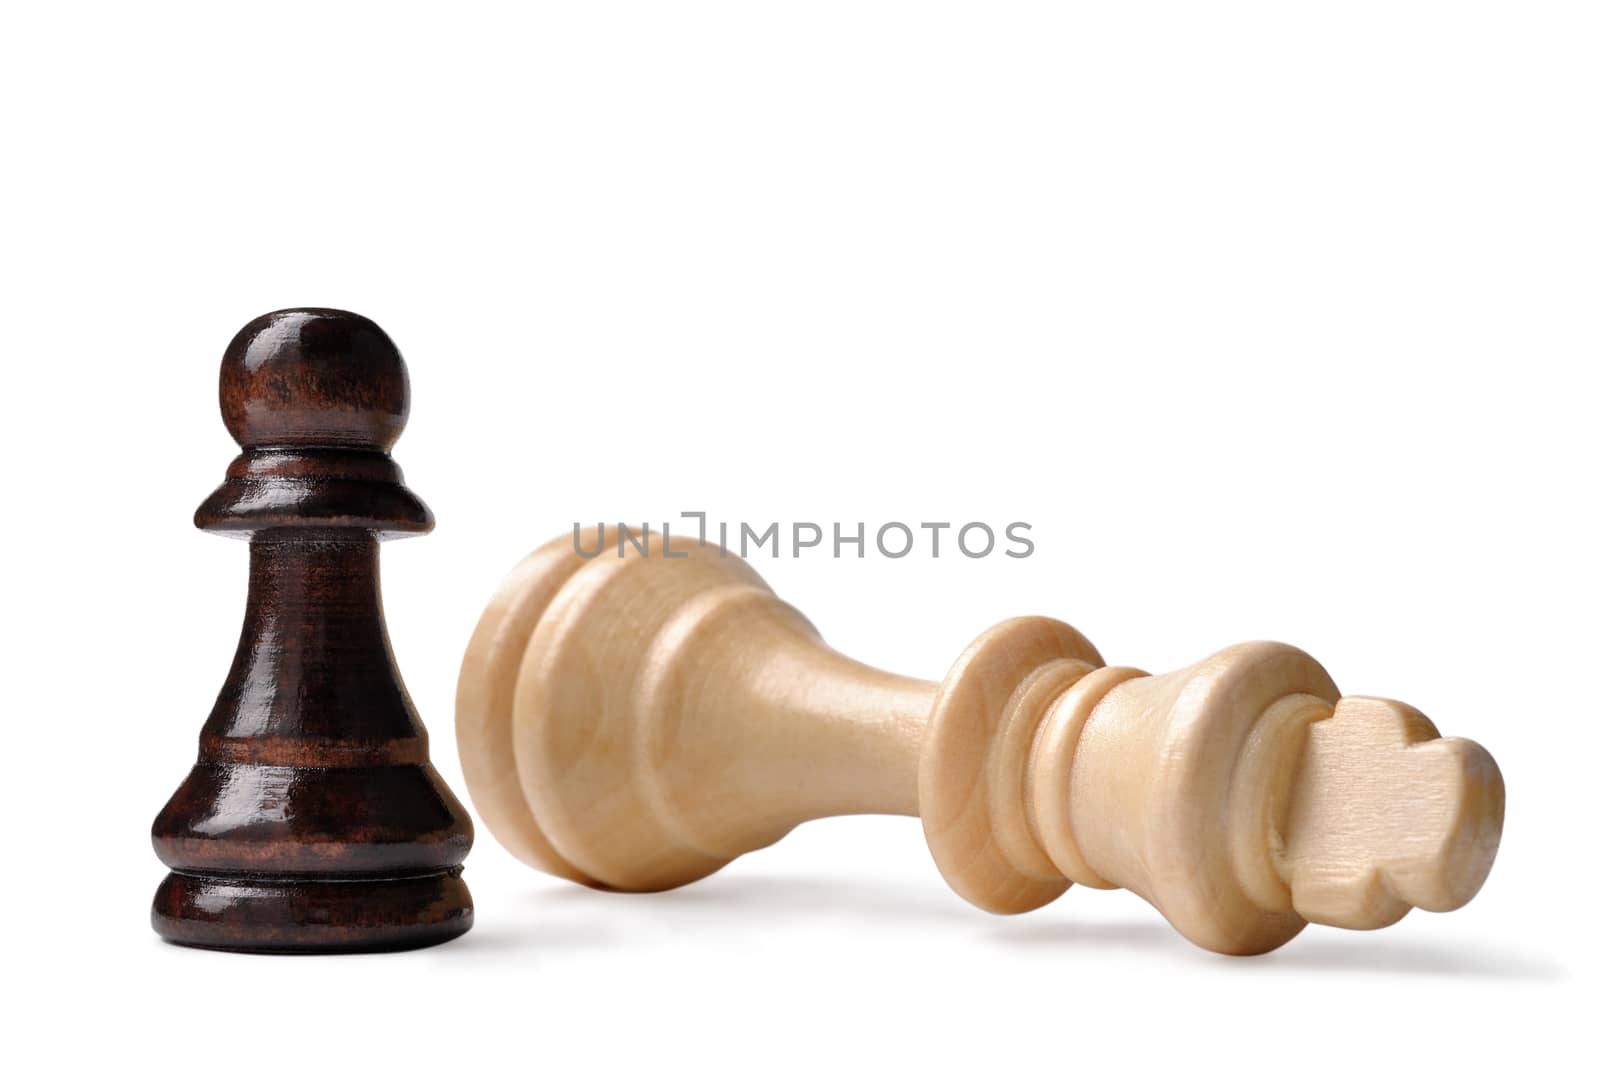 David and Goliath syndrome in chess with a small dark pawn standing triumphant over a fallen light wood king on a white background